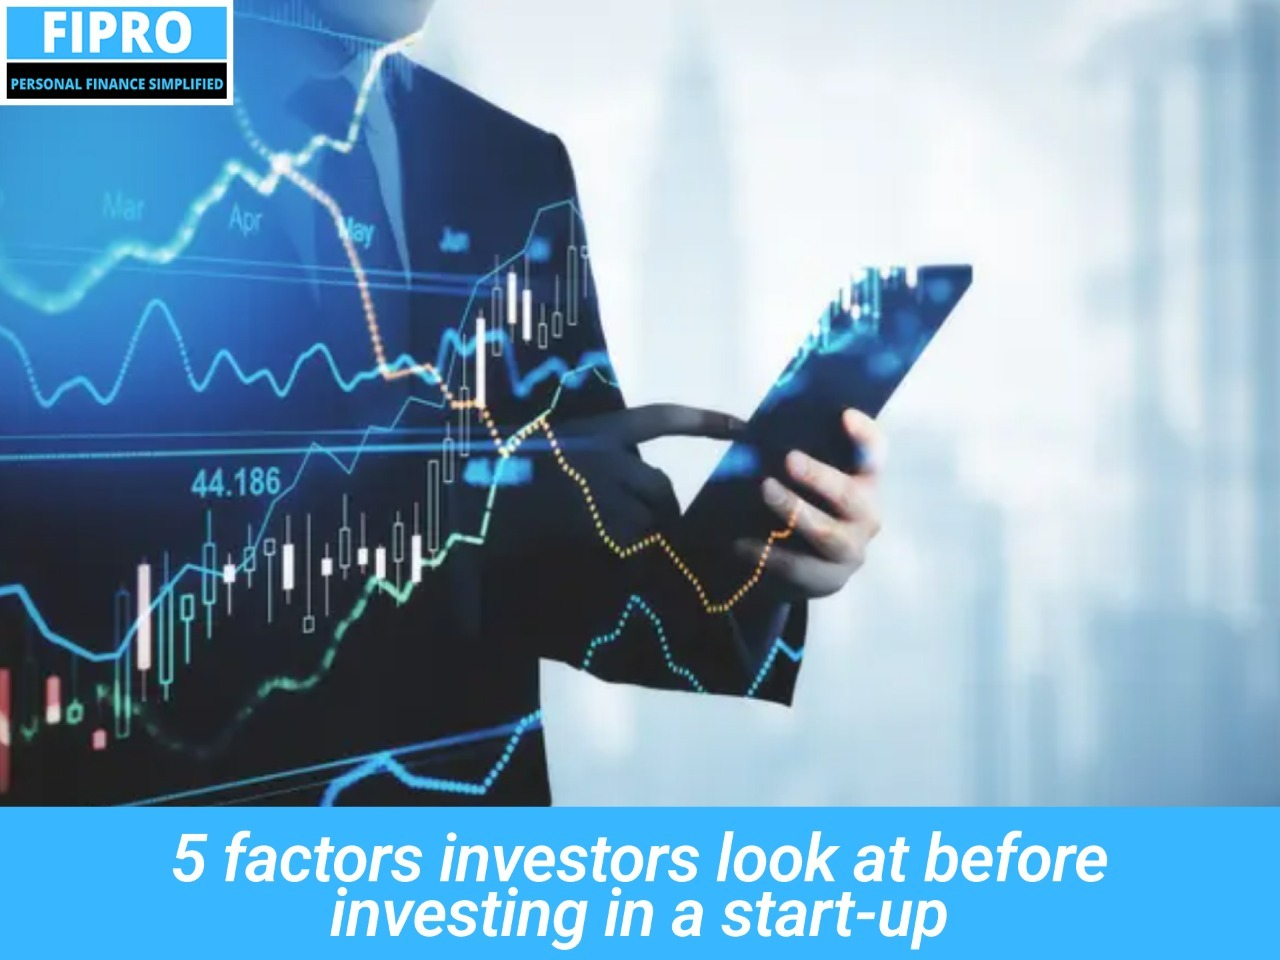 5 factors investors look at before investing in a start-up - Fipro Education And Investments